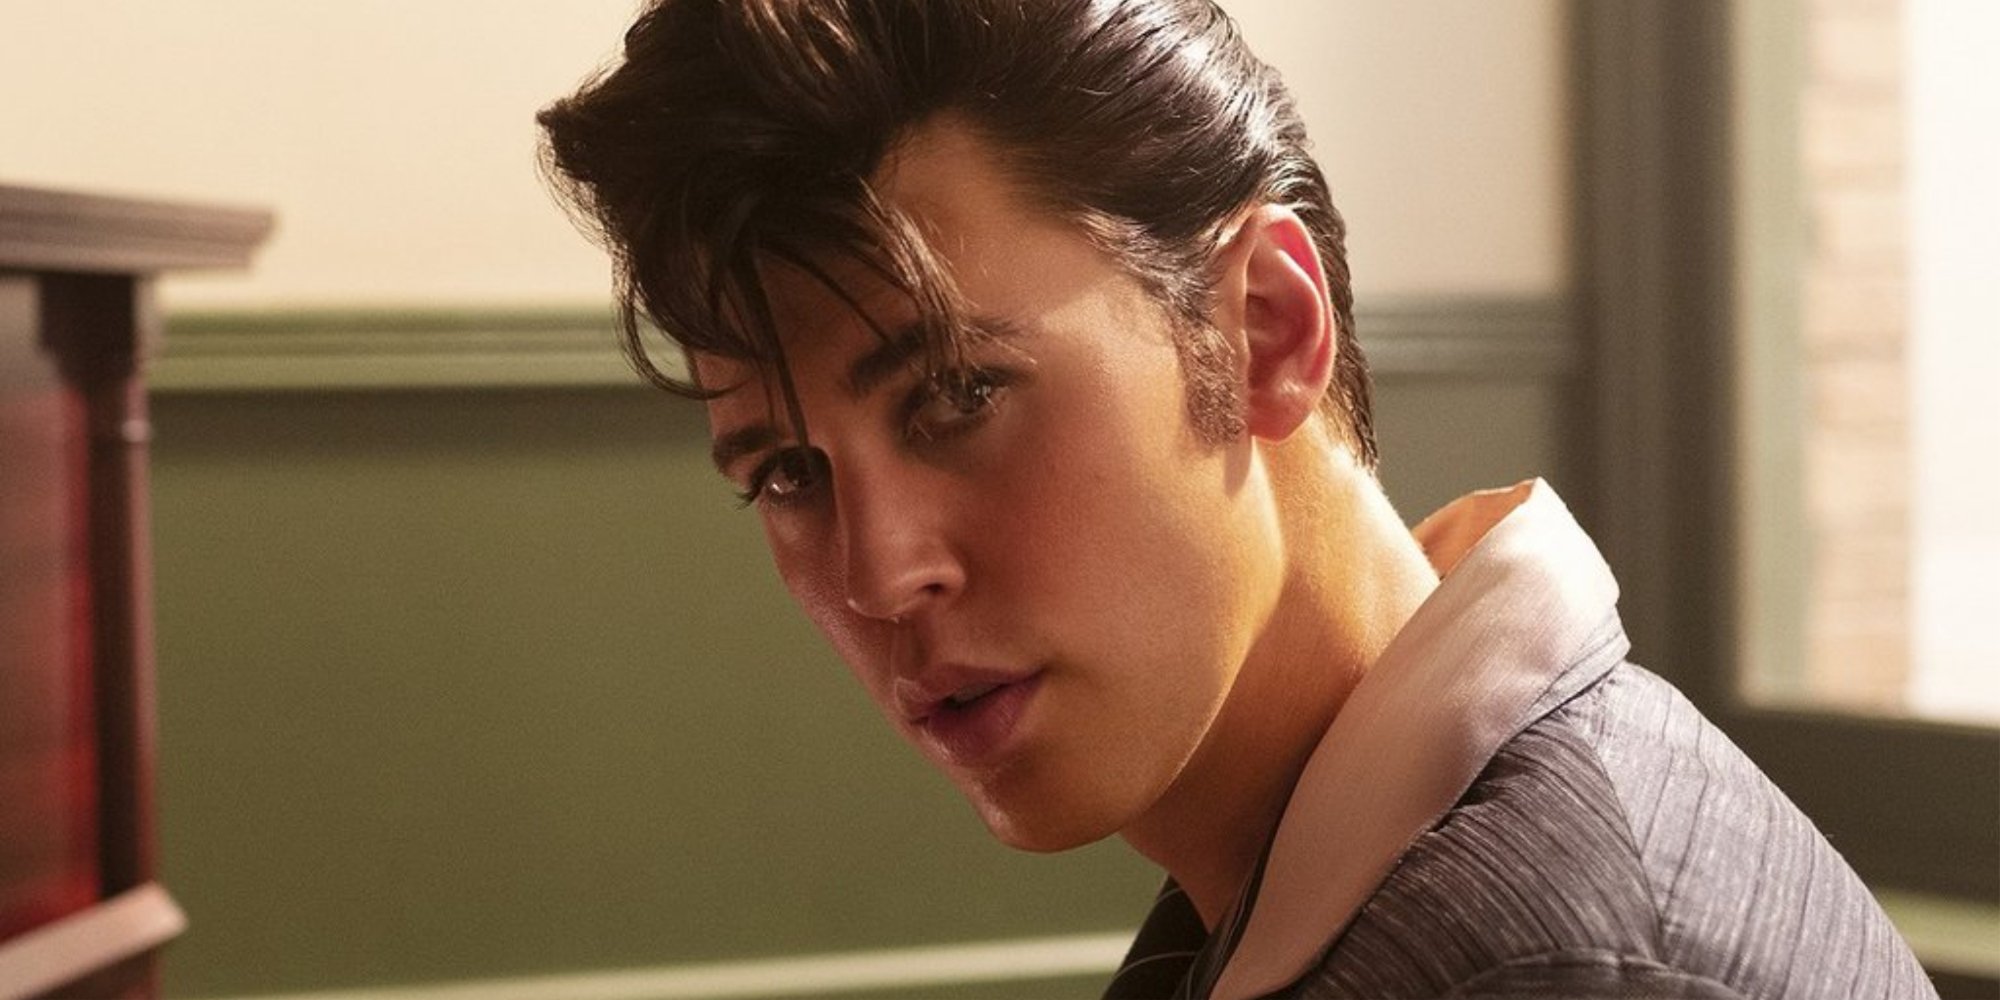 Austin Butler in the motion picture 'Elvis' where he played Elvis Presley.